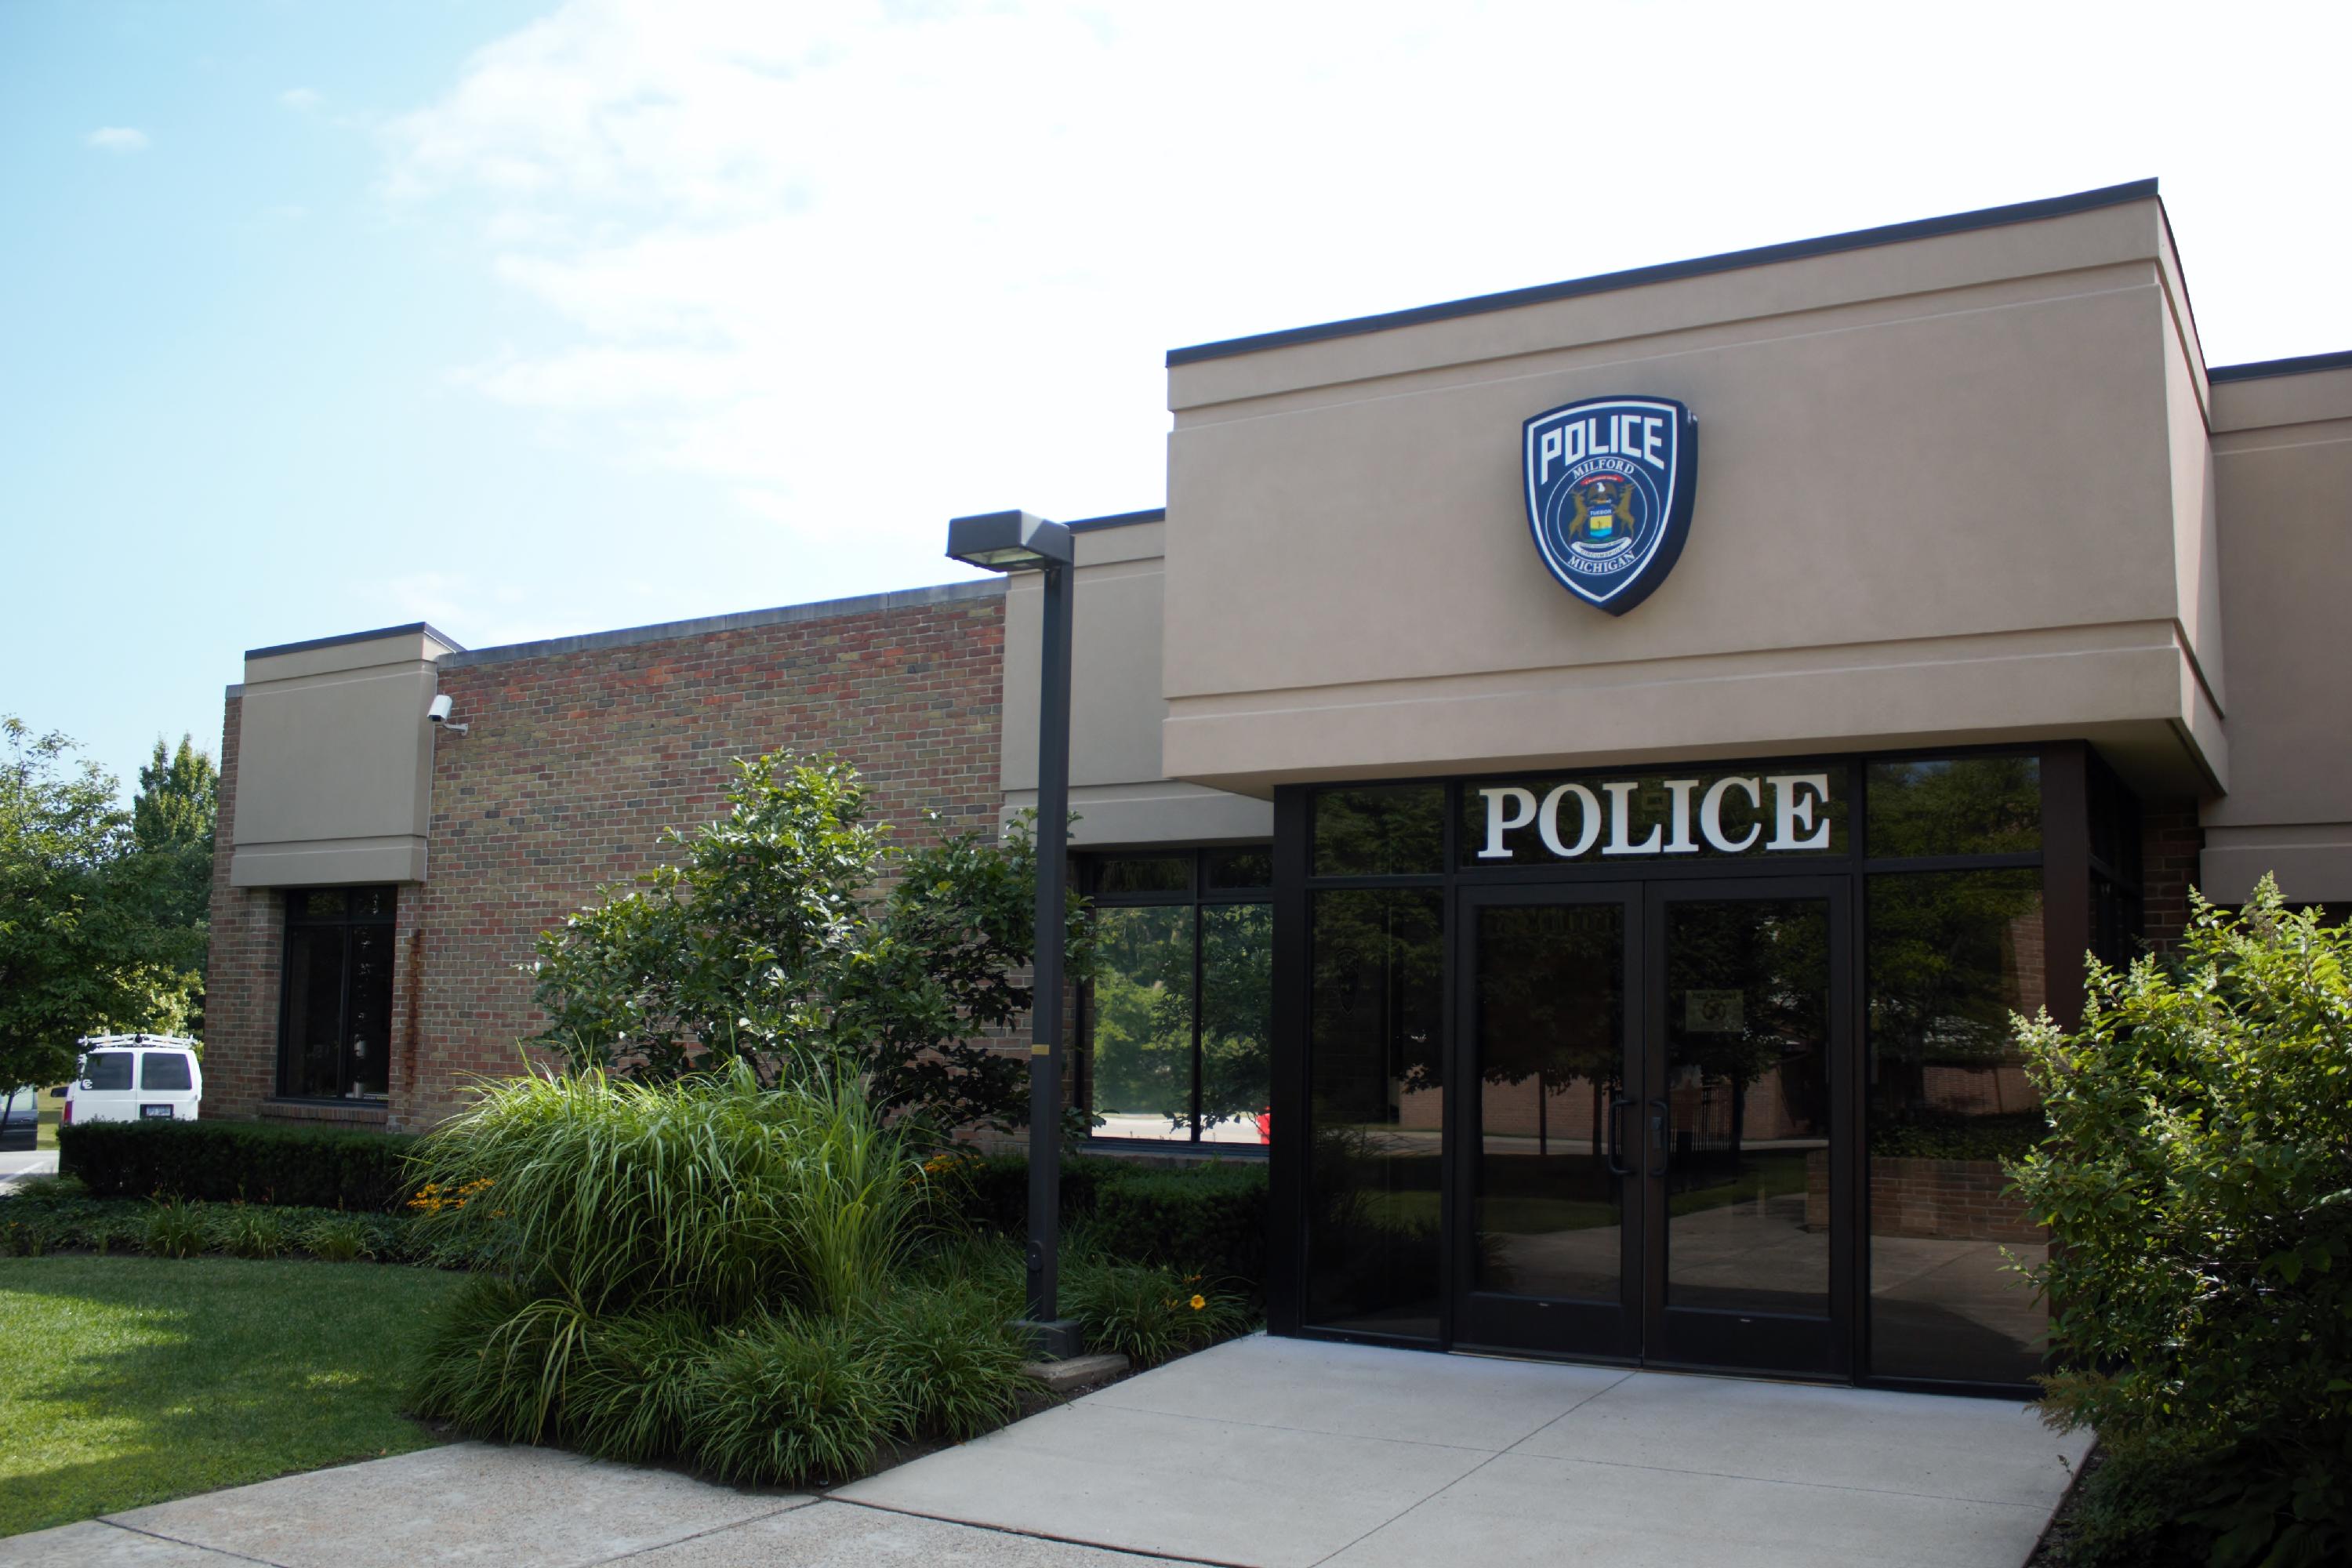 Police Department Entrance